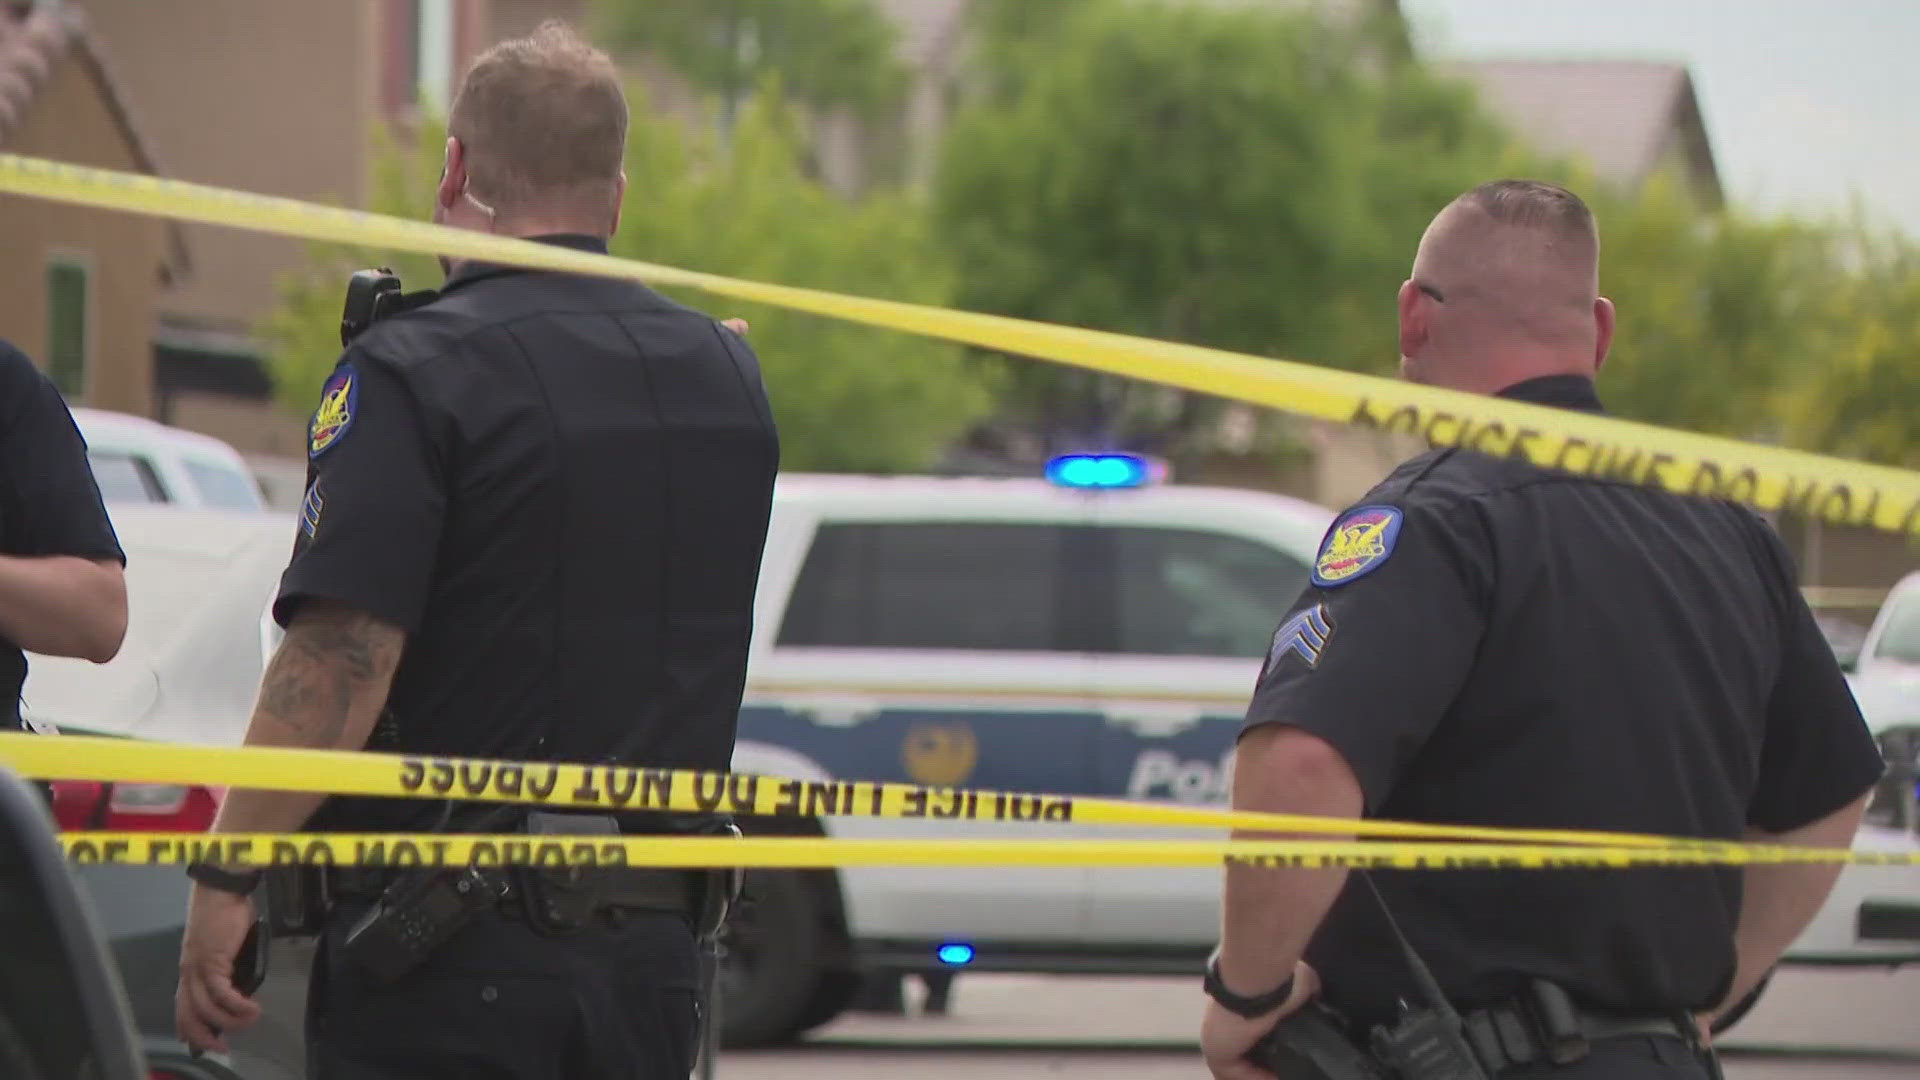 The fatal shooting was reported Friday afternoon near 99th Avenue and Lower Buckeye Road.